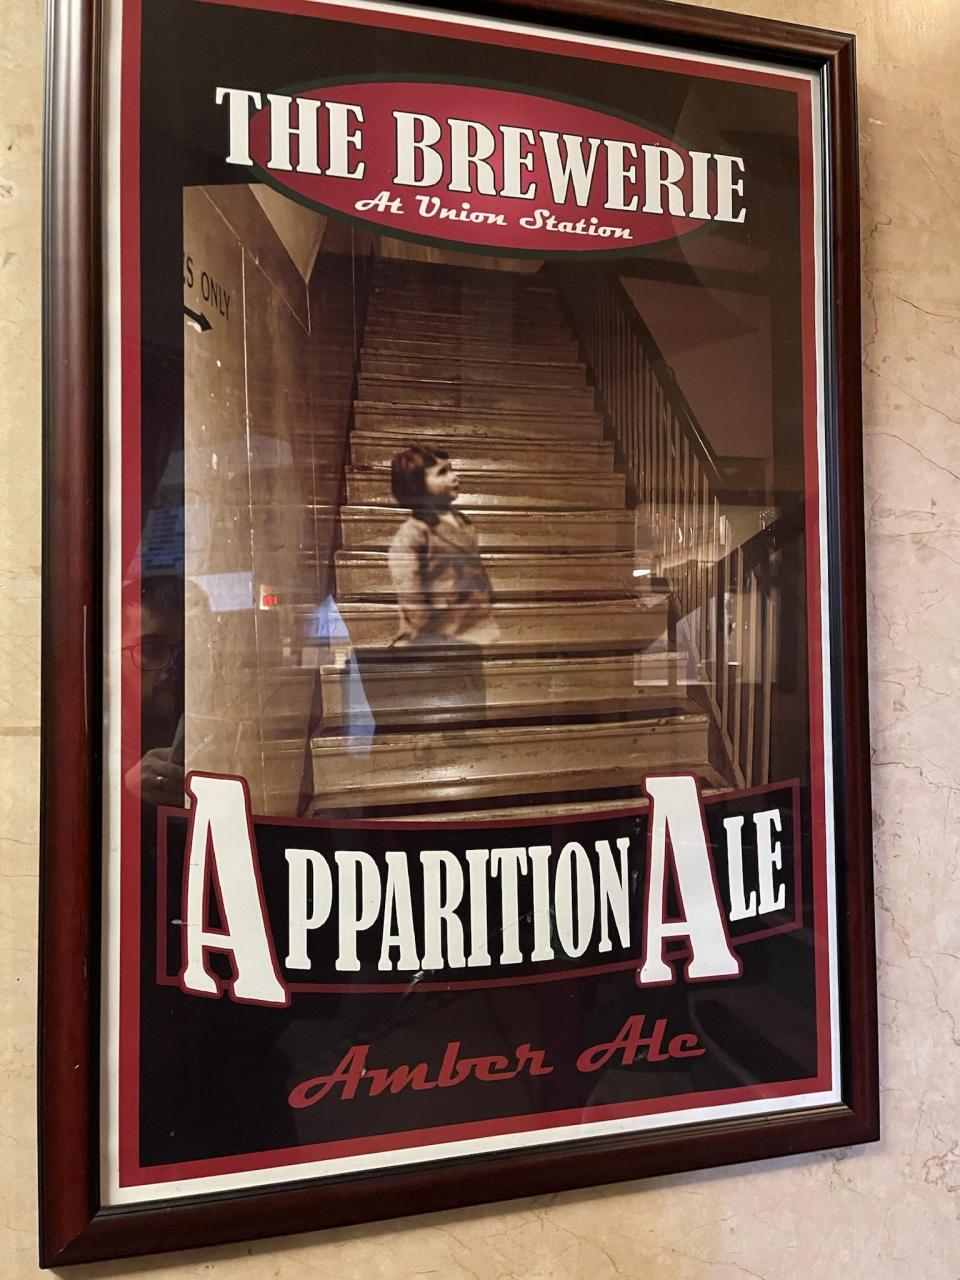 Clara's Stairs poster for The Brewerie at Union Station at 123 W. 14th St.